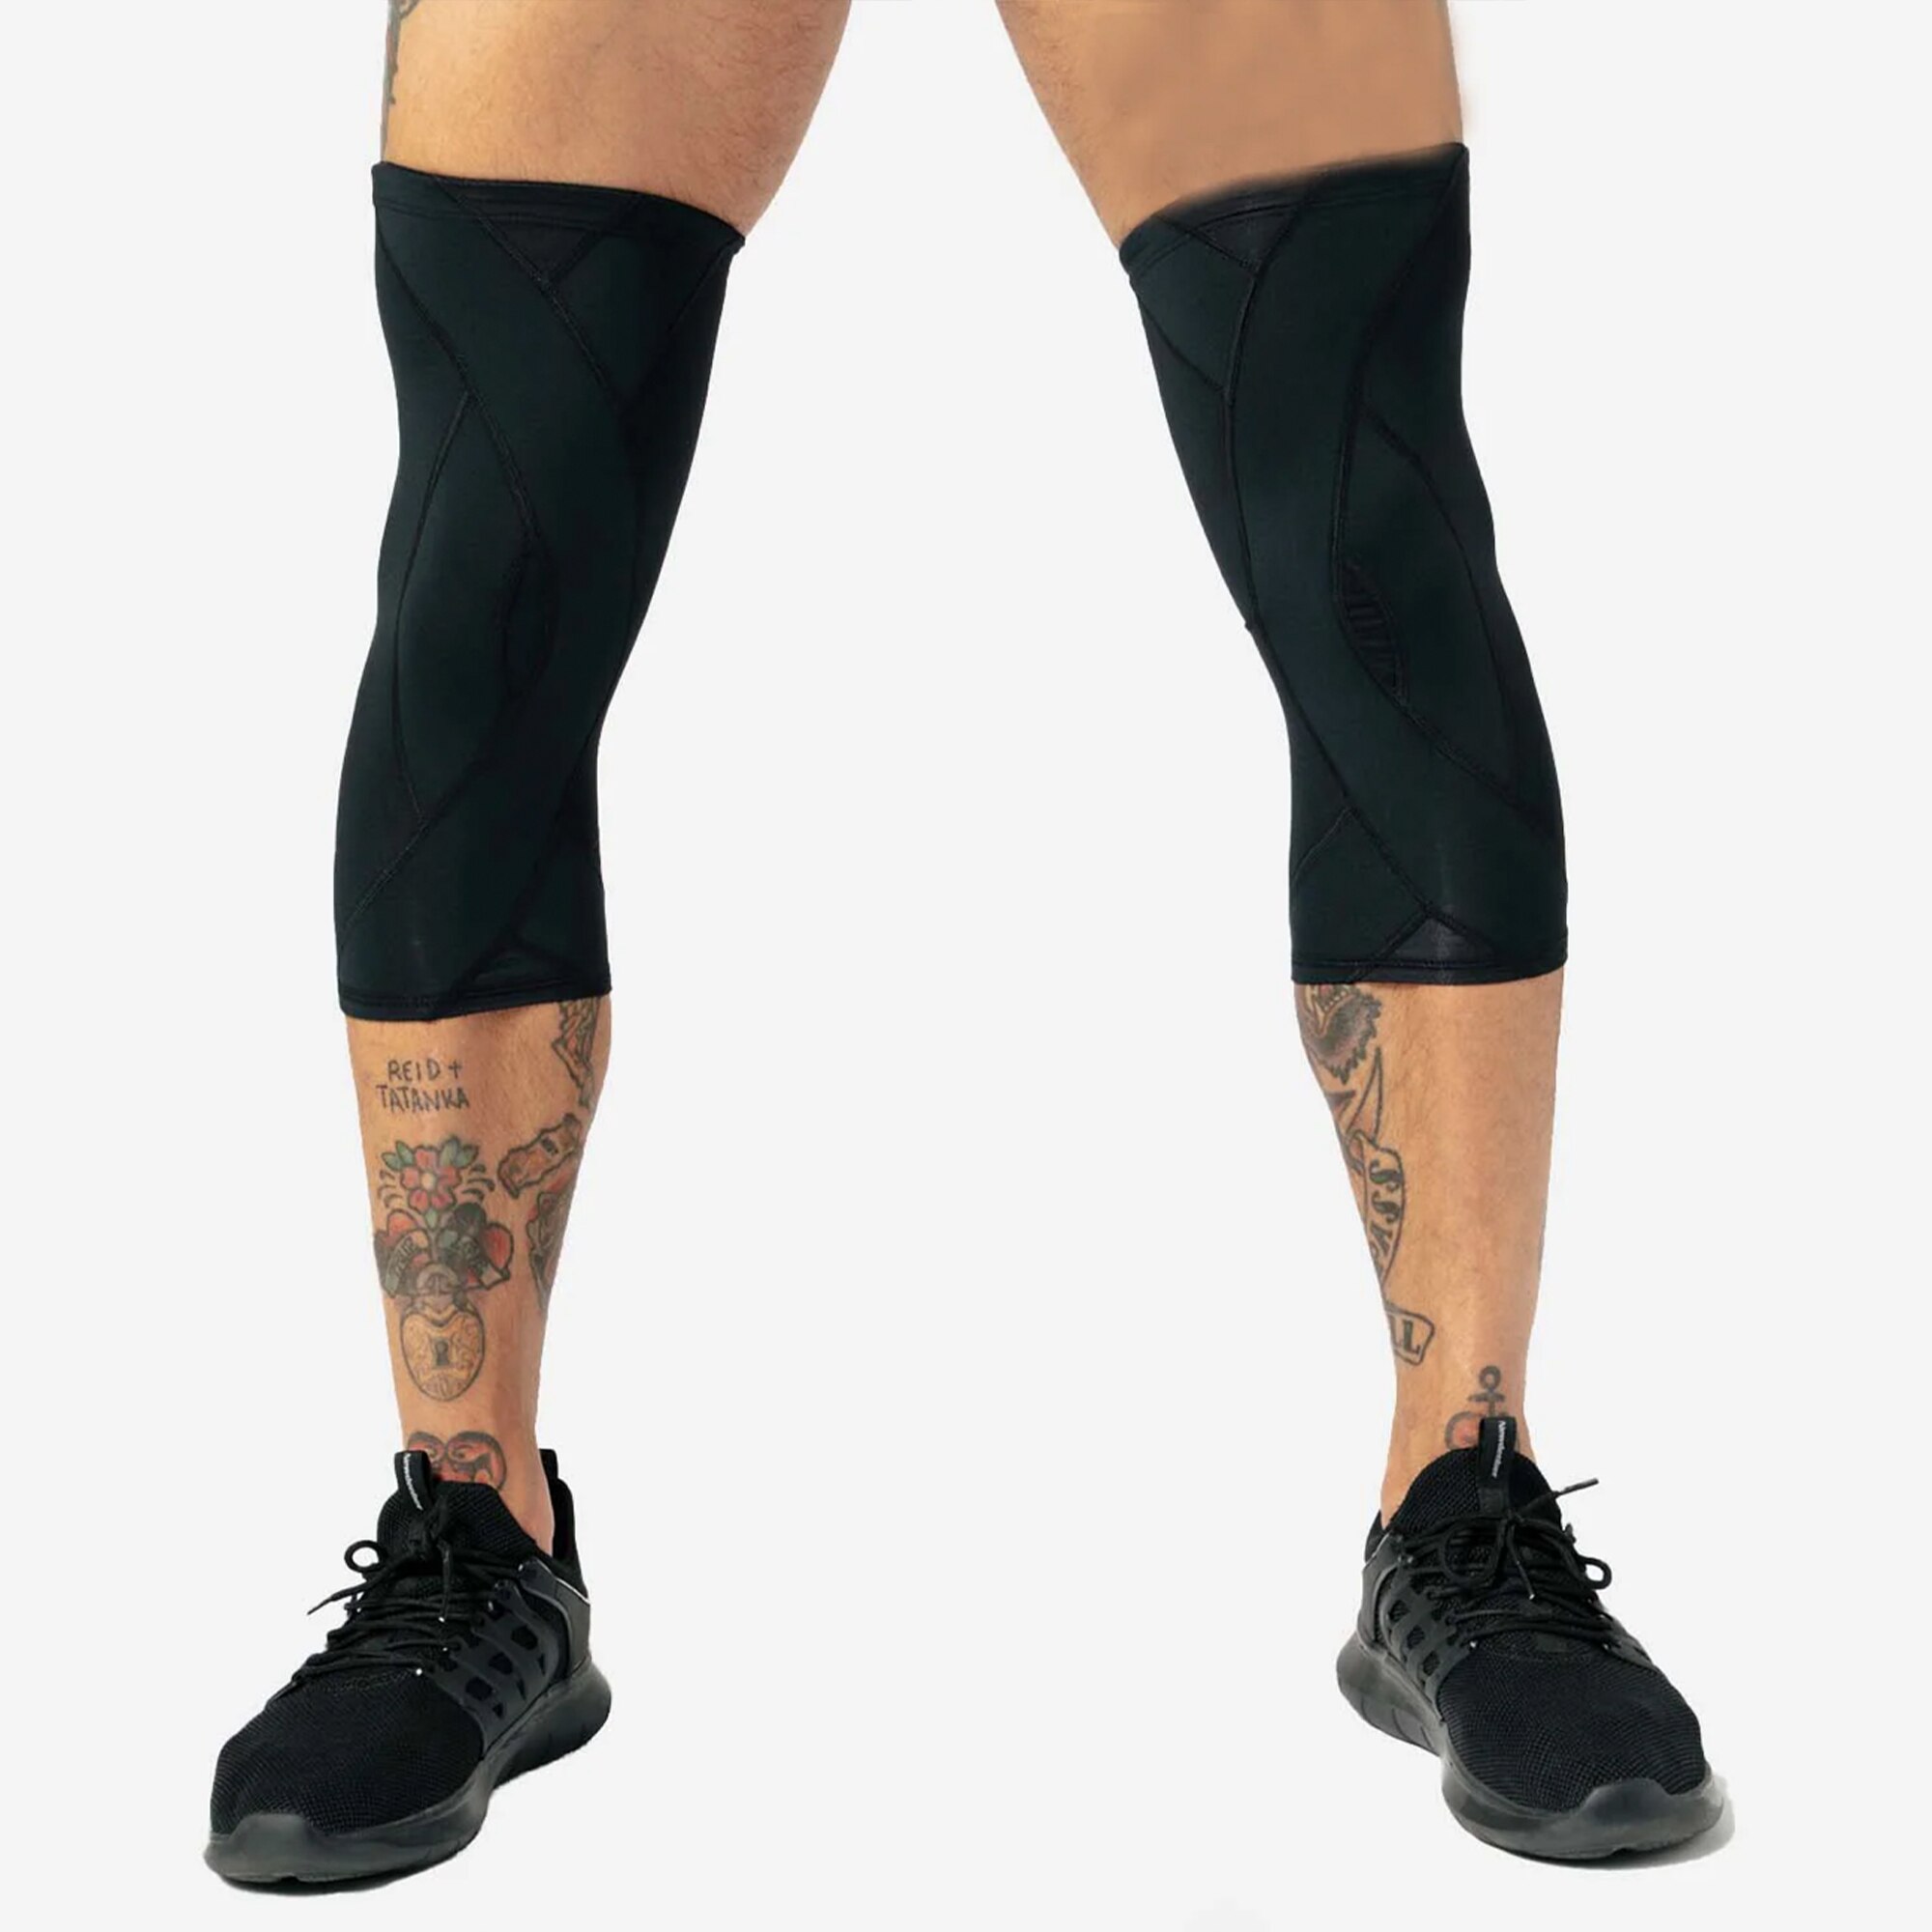 DNFD Active AX Compression Knee Sleeves, Small , CVS